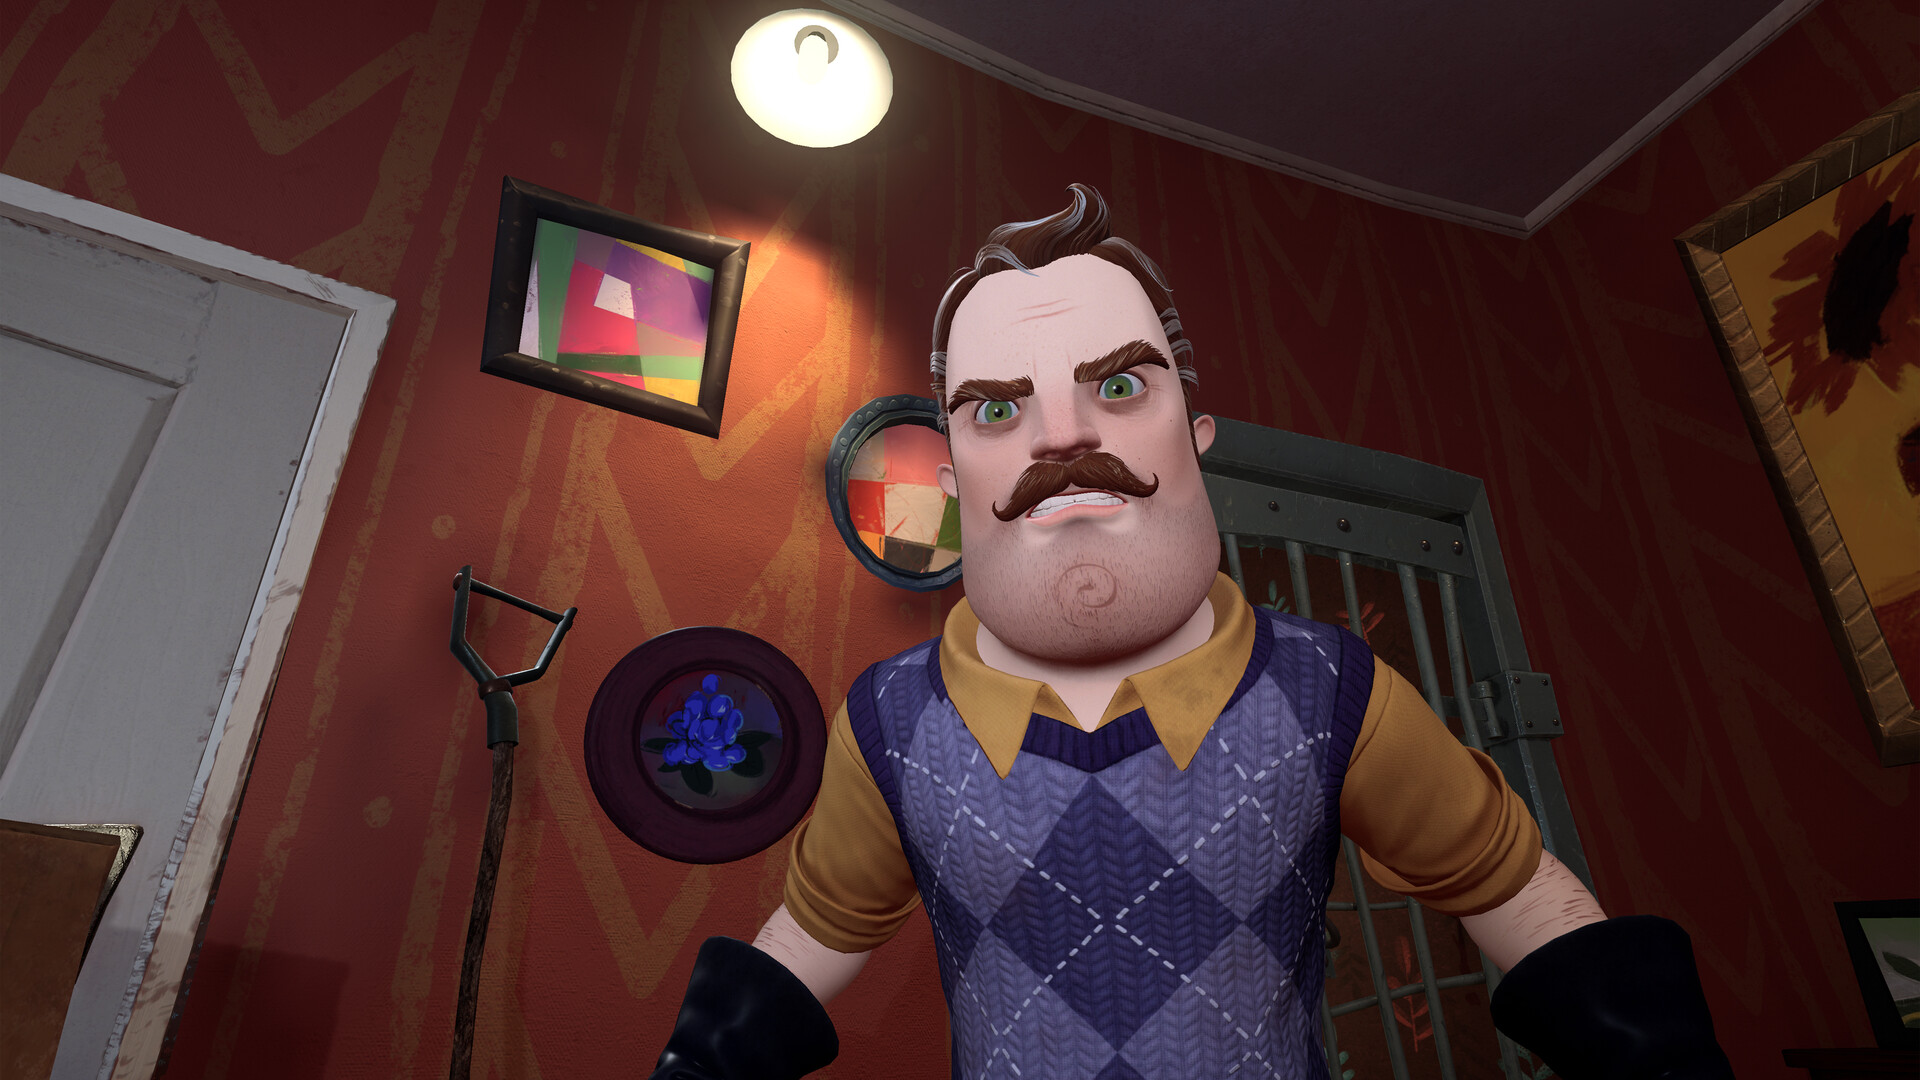 Hello Neighbor VR: Search and Rescue Steam CD Key 7.23 USD